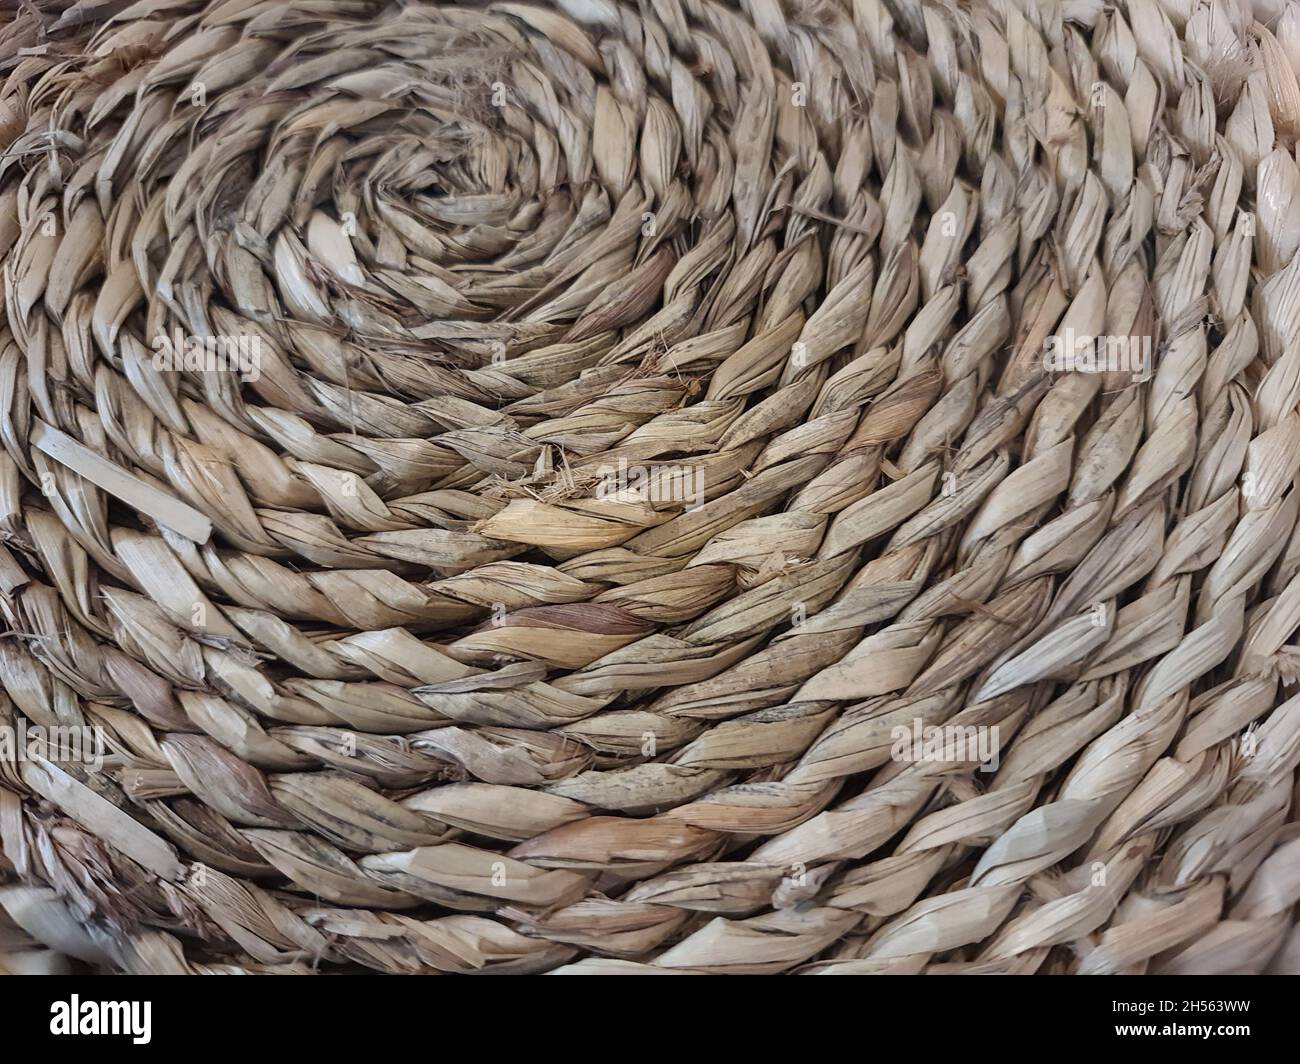 Natural fiber work, raw colored, in spiral shape, creative placemat, full screen, full screen. Stock Photo